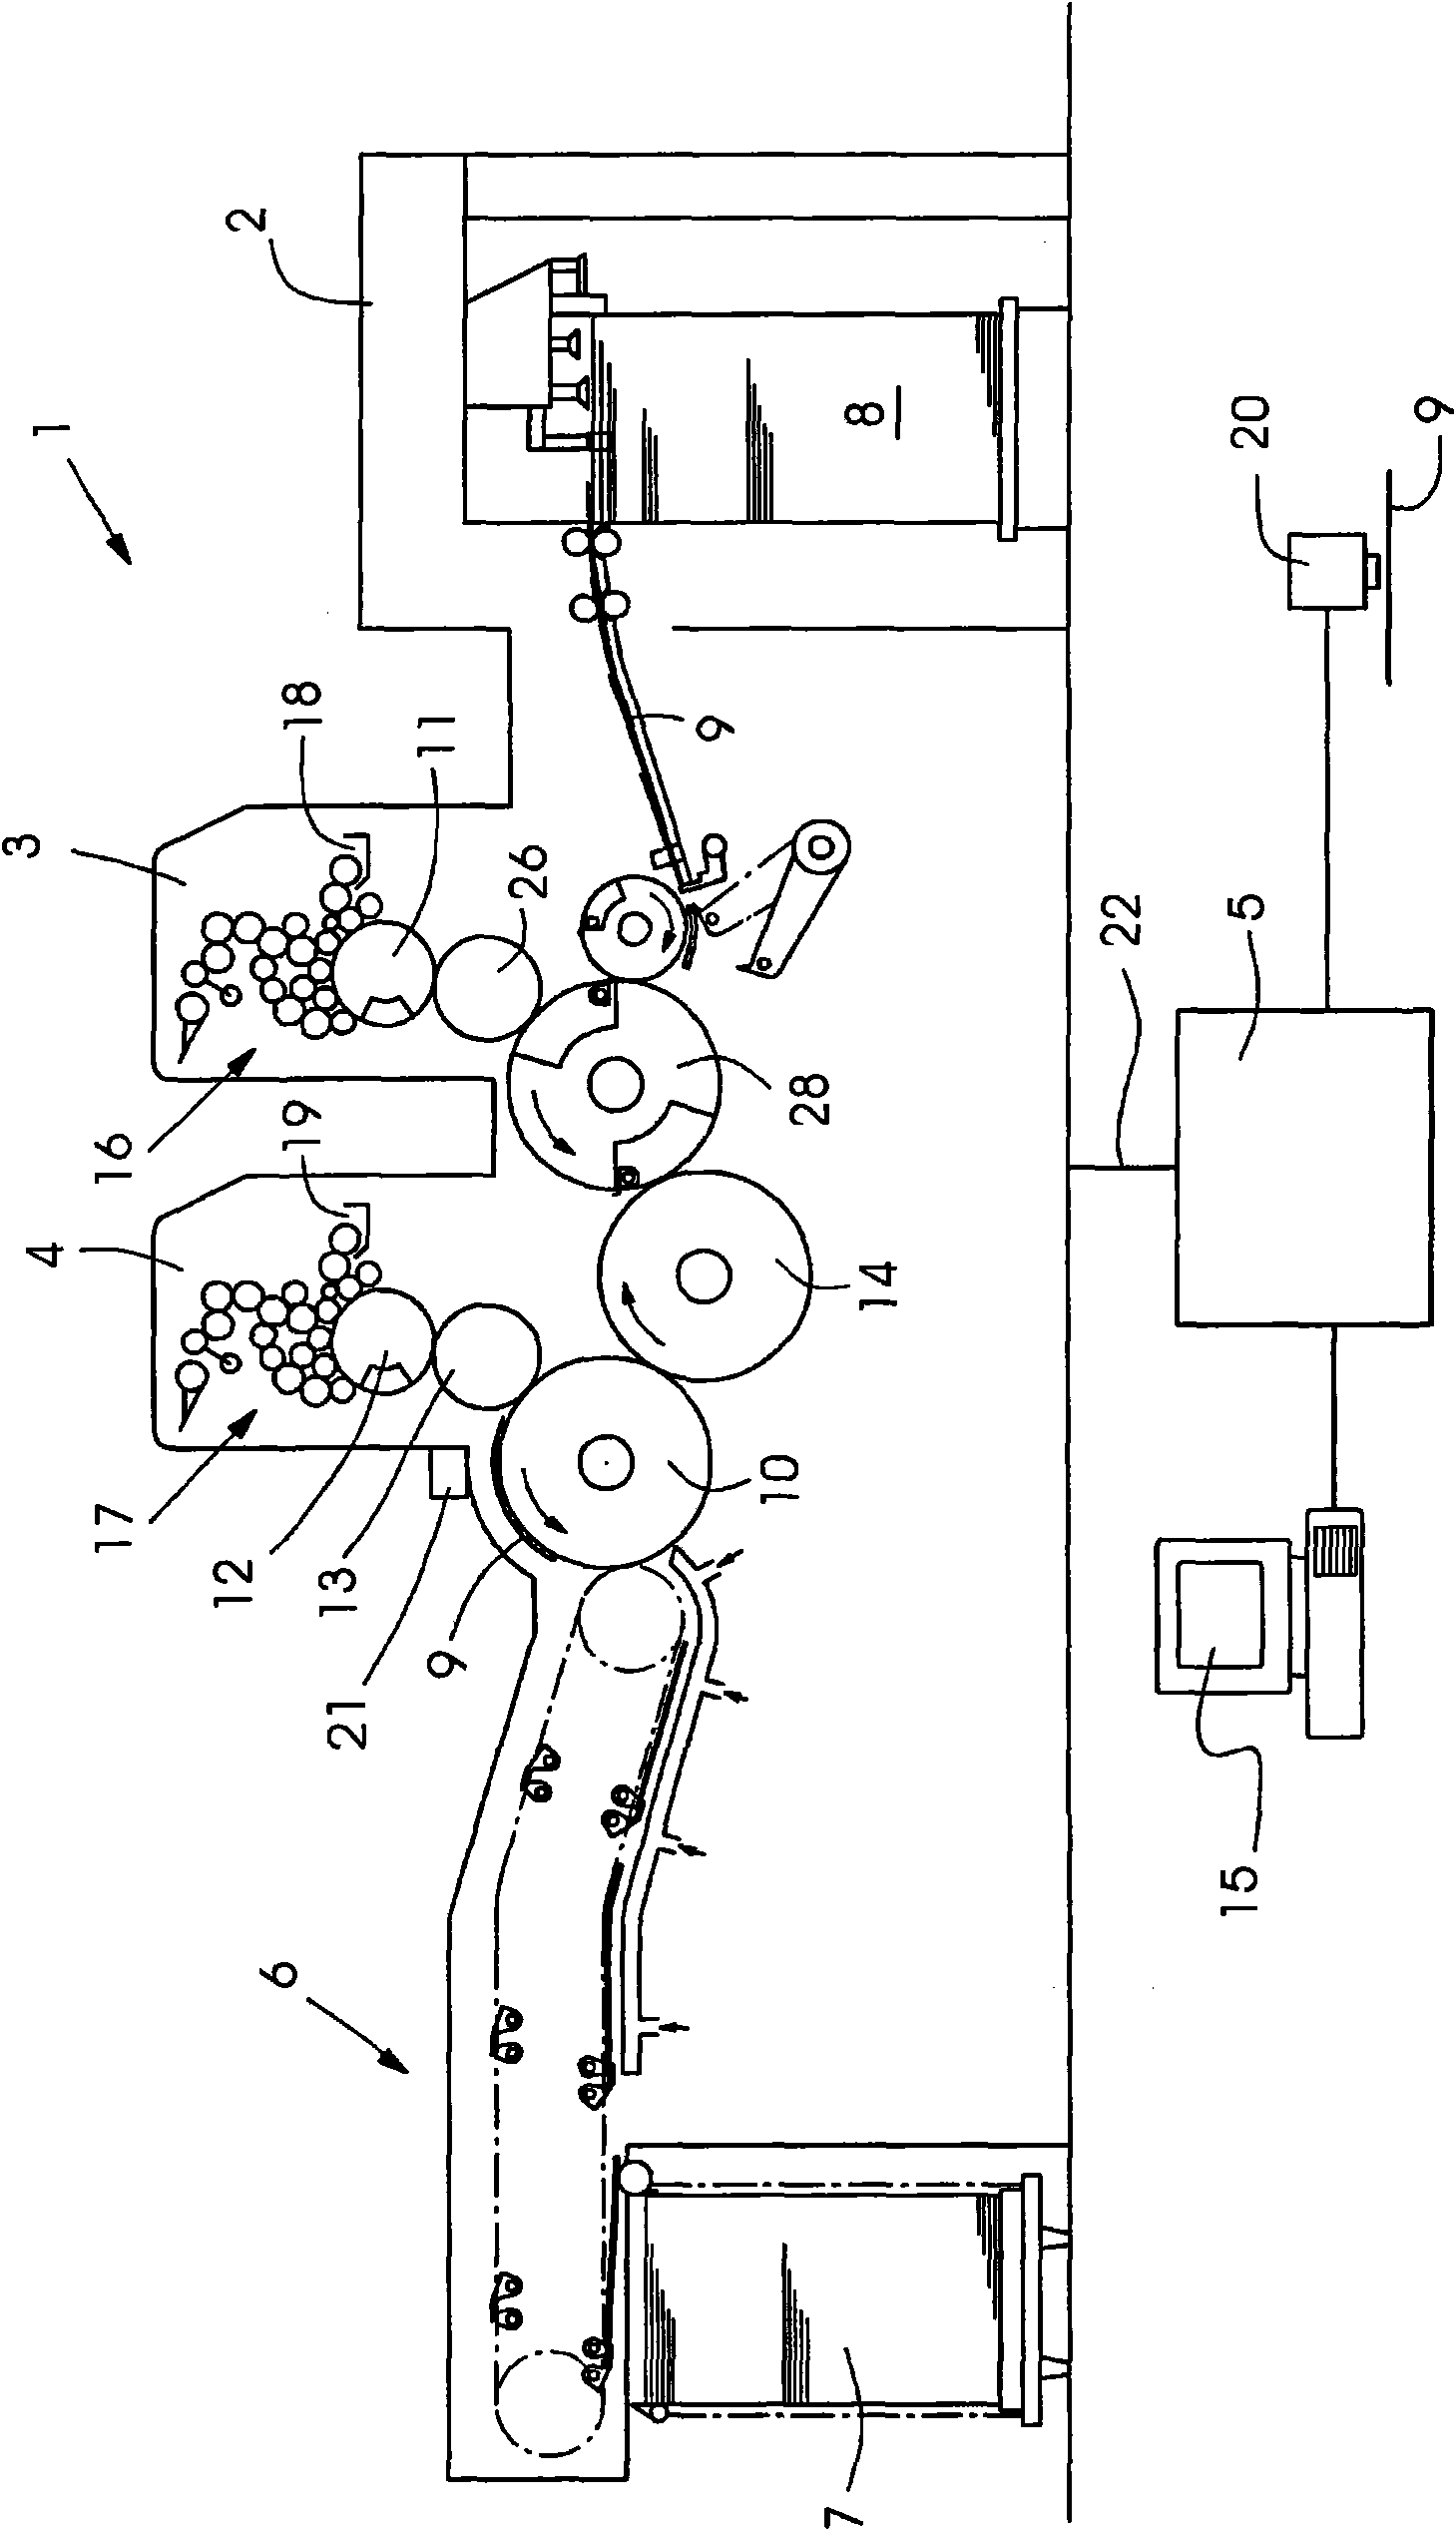 Method for controlling inking units and/or dampening units